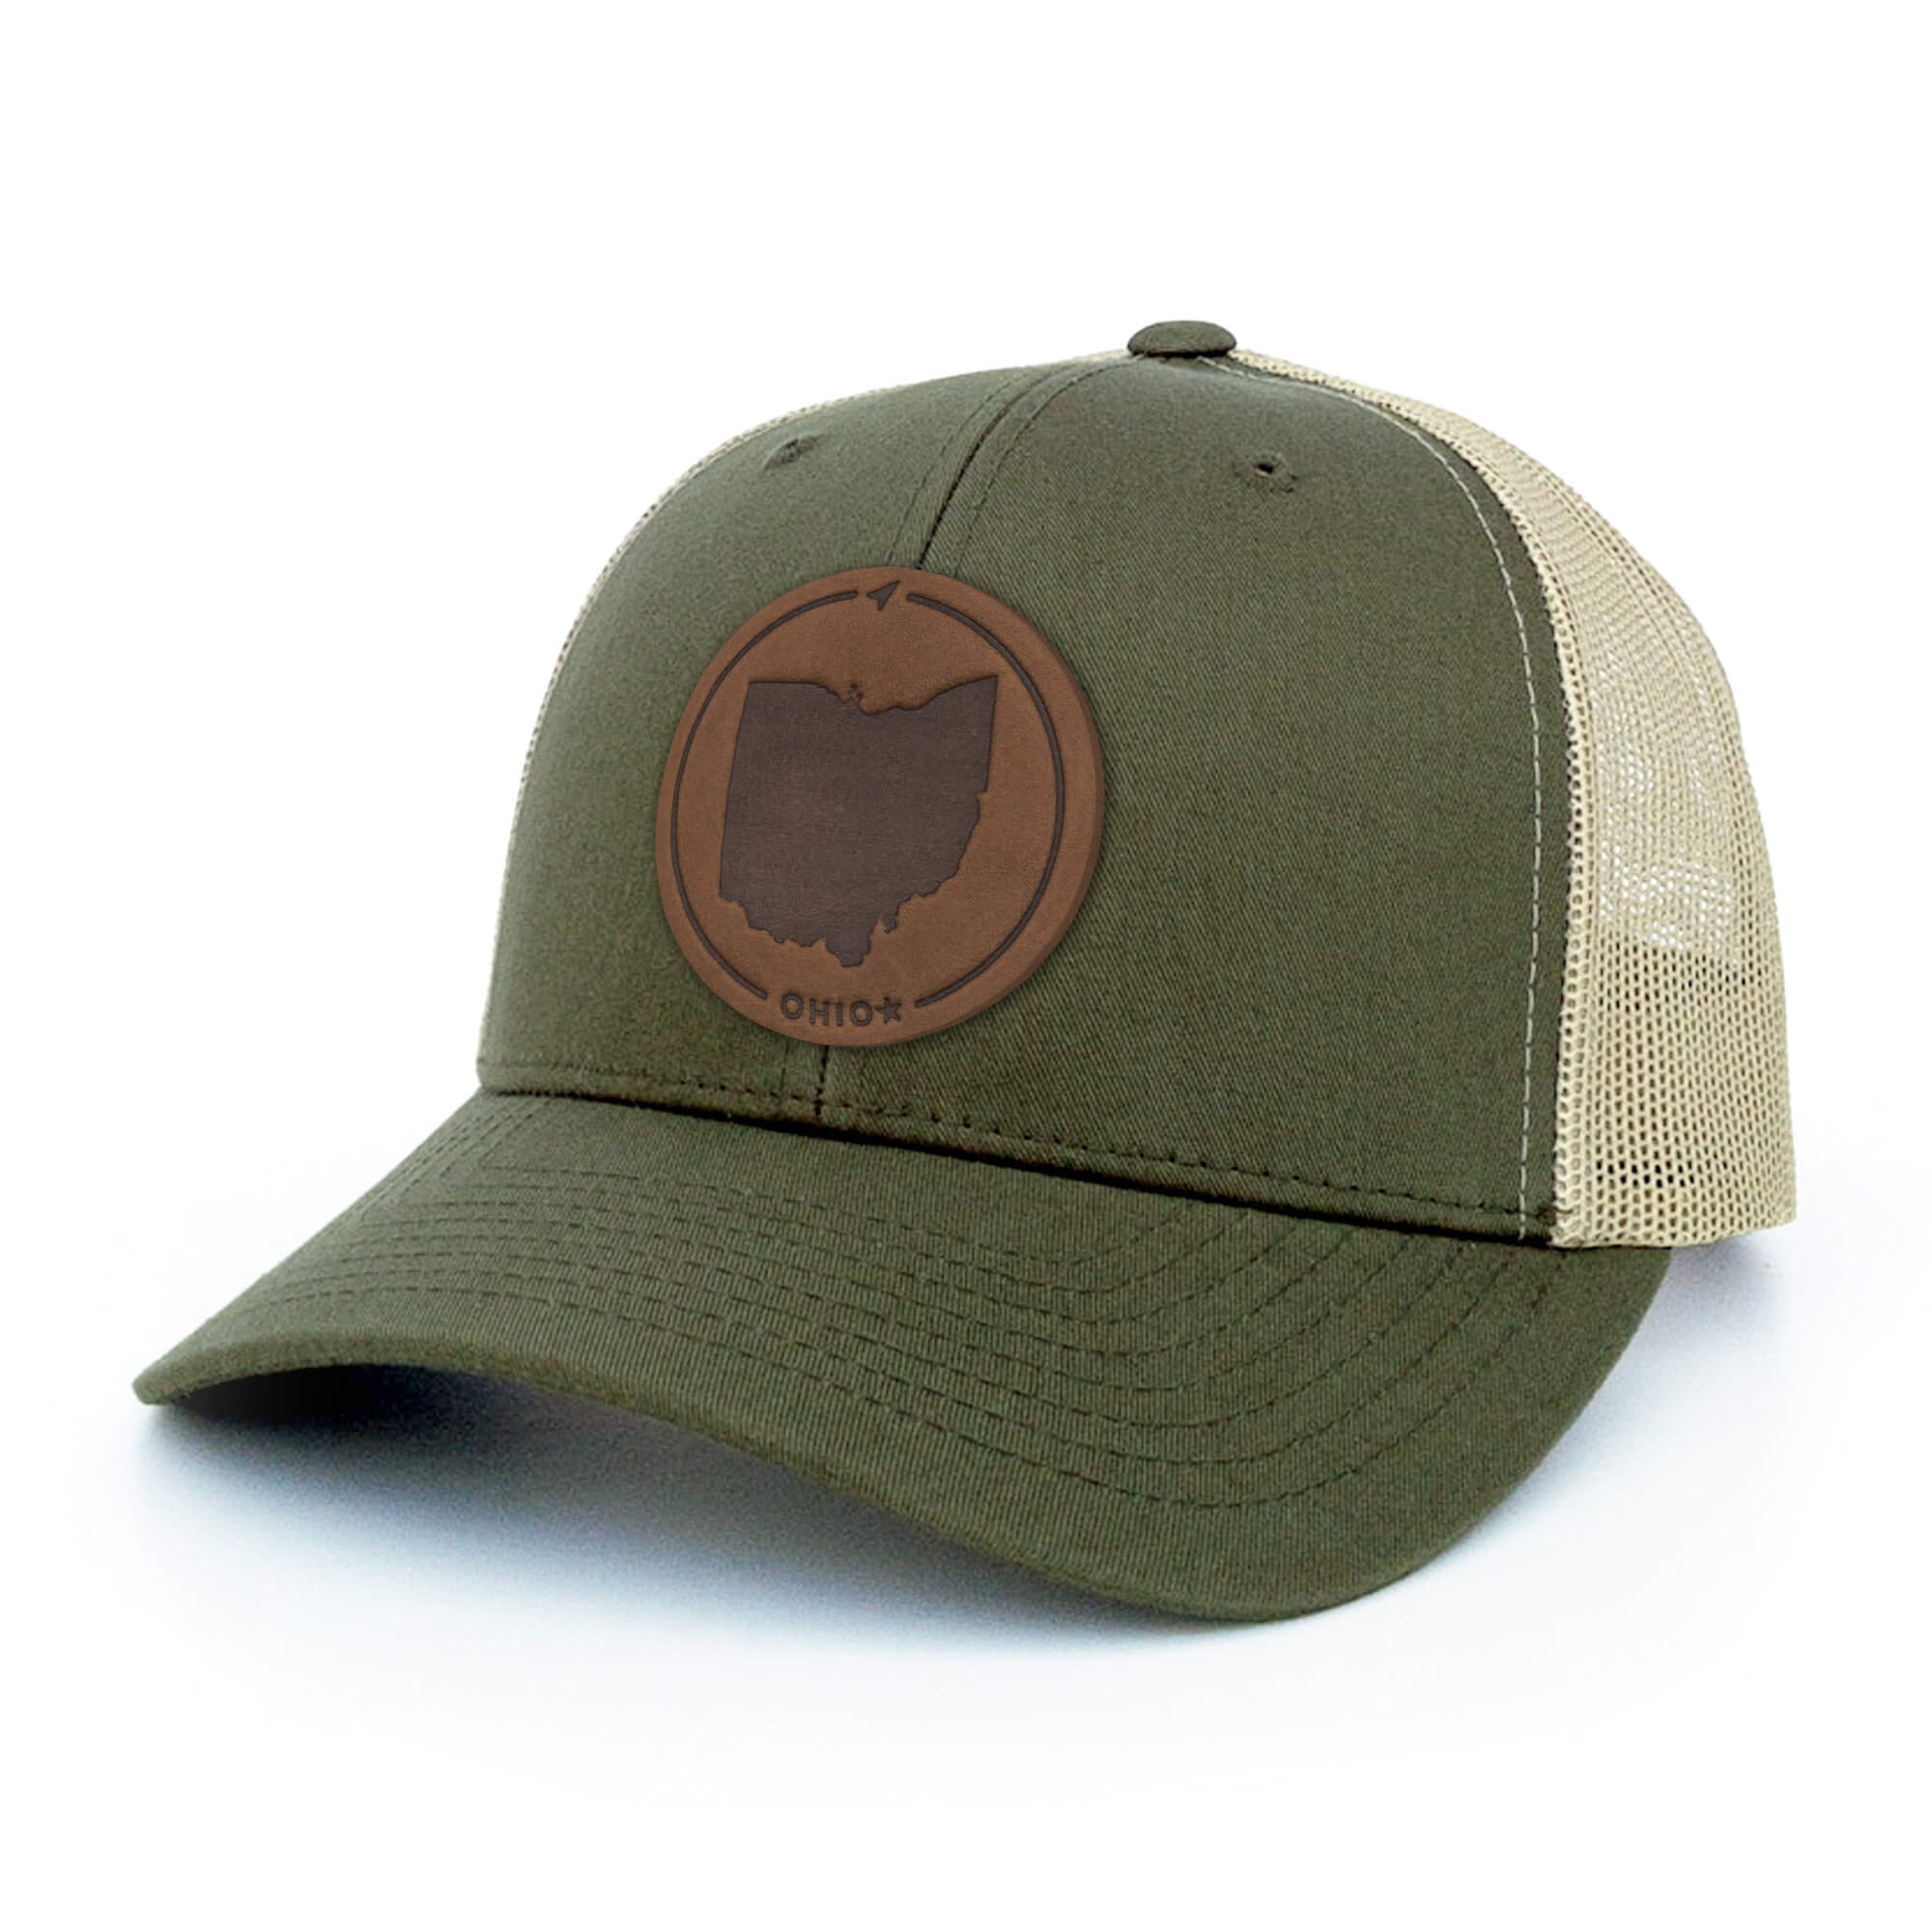 Moss khaki trucker hat with full-grain leather patch of Ohio | BLACK-003-004, CHARC-003-004, NAVY-003-004, HGREY-003-004, MOSS-003-004, BROWN-003-004